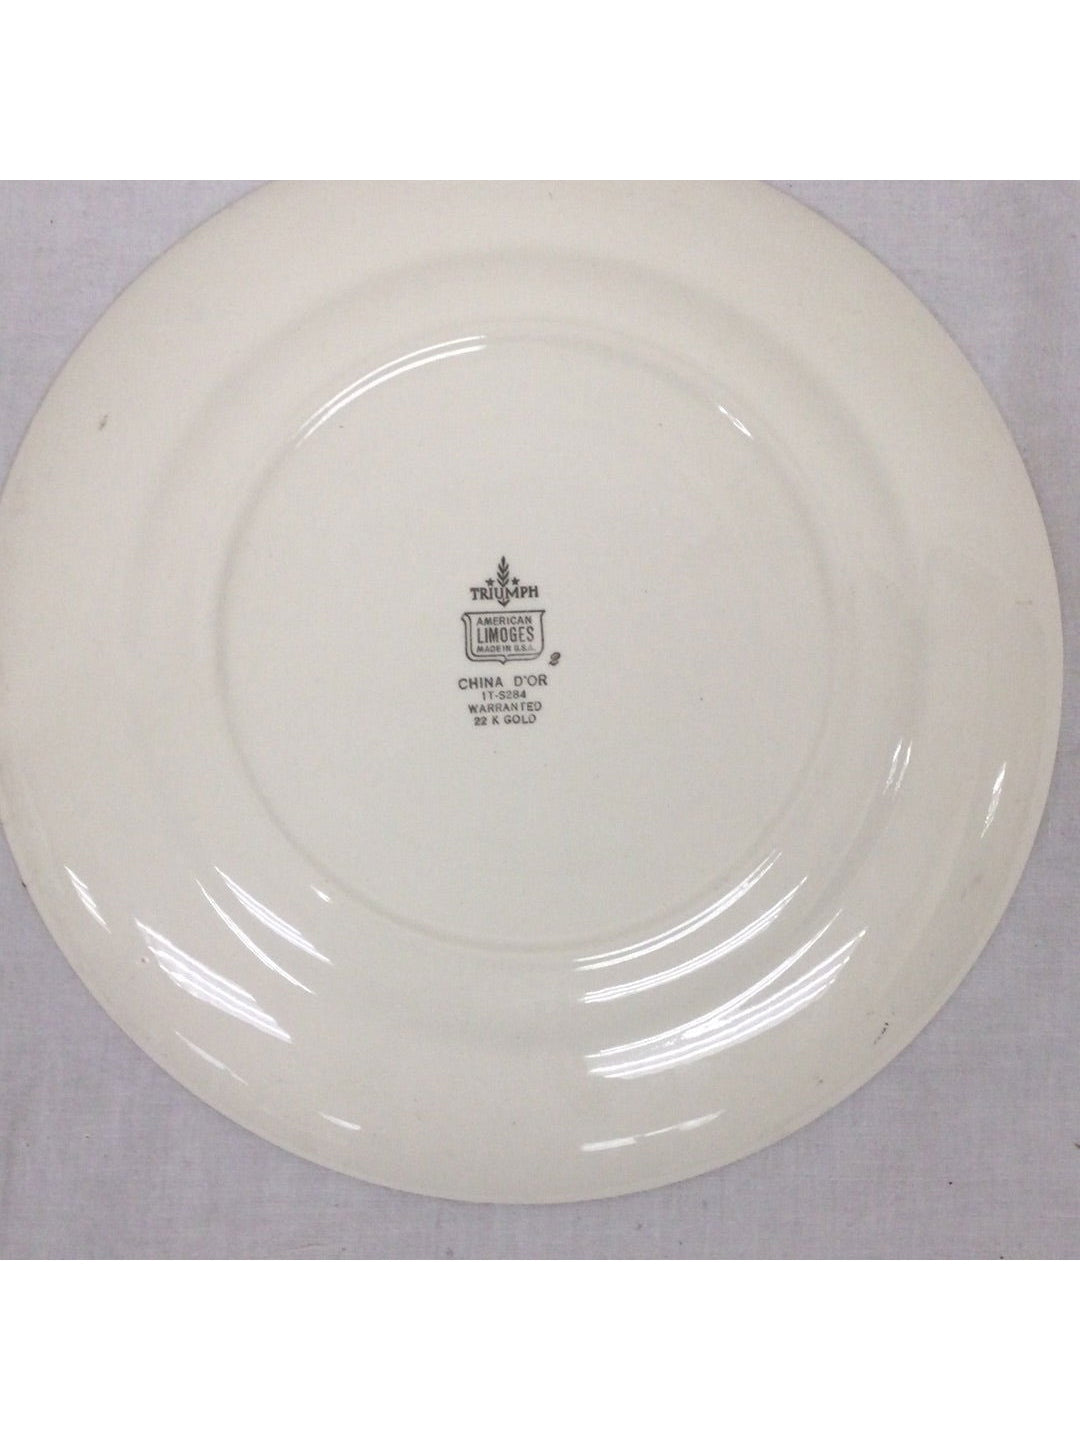 Vintage Triumph Limoges China d'Or Dinner Plate - The Kennedy Collective Thrift - 